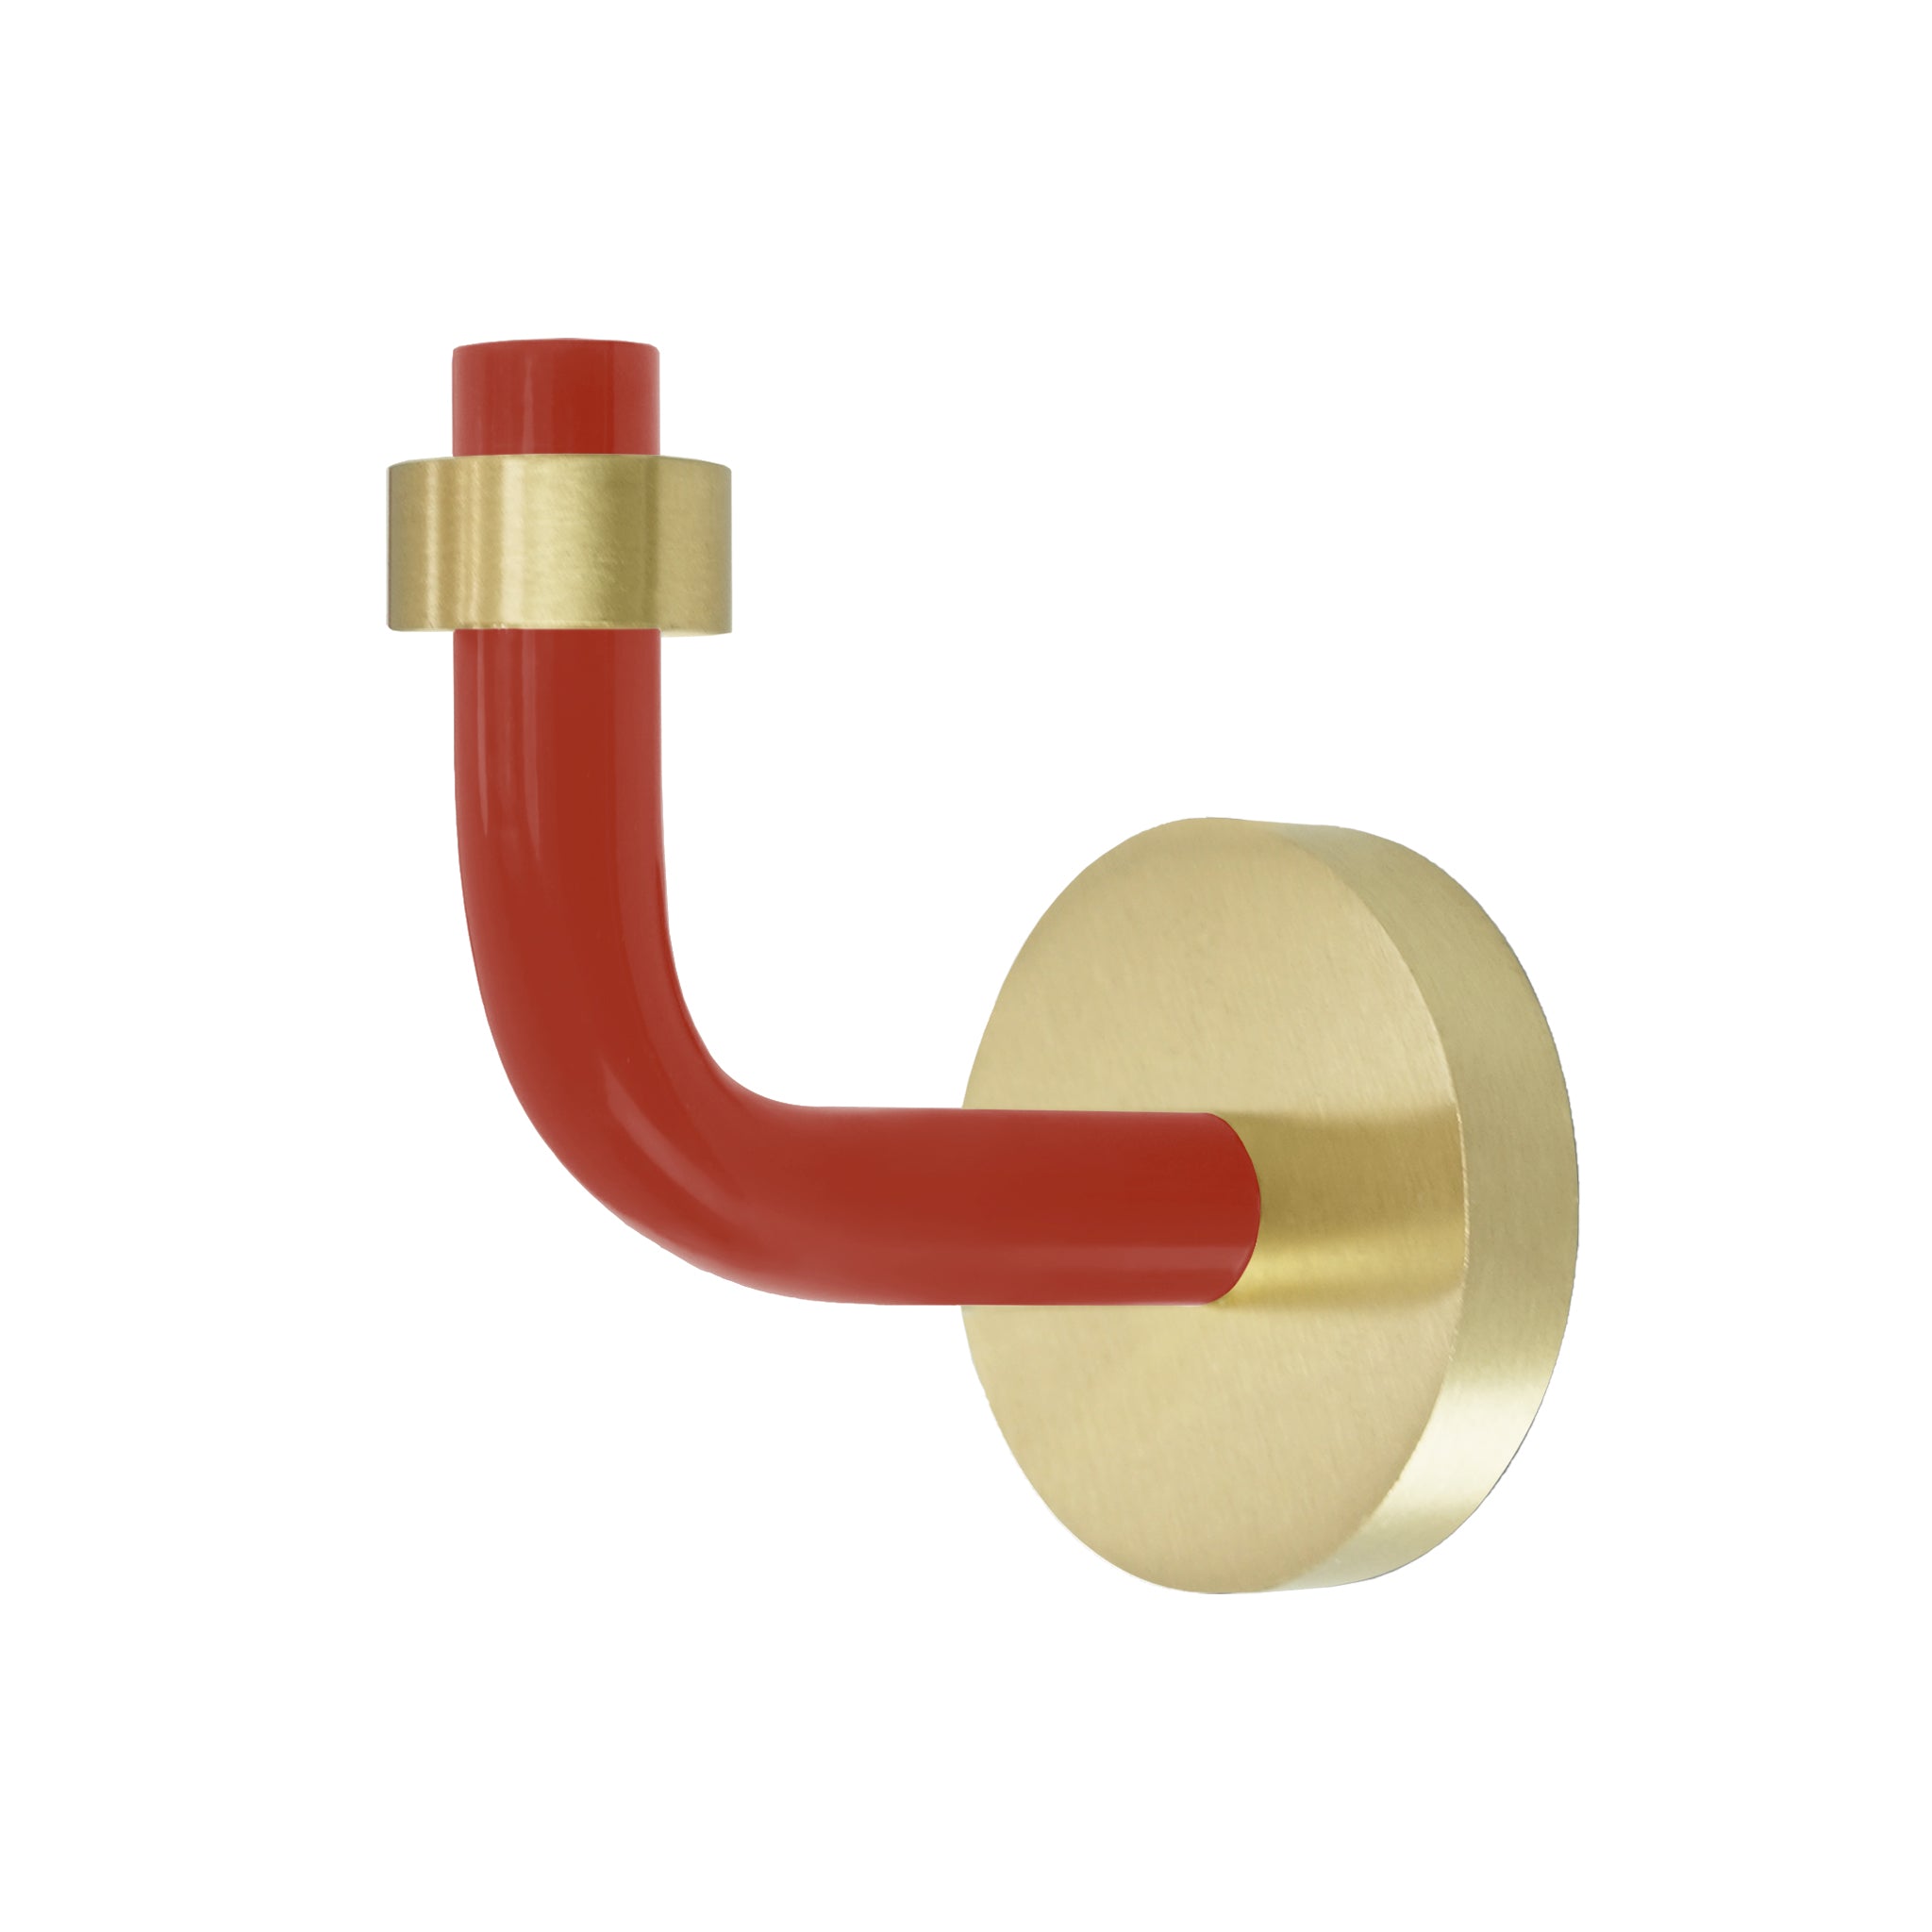 Brass and riding hood red color Snug hook Dutton Brown hardware